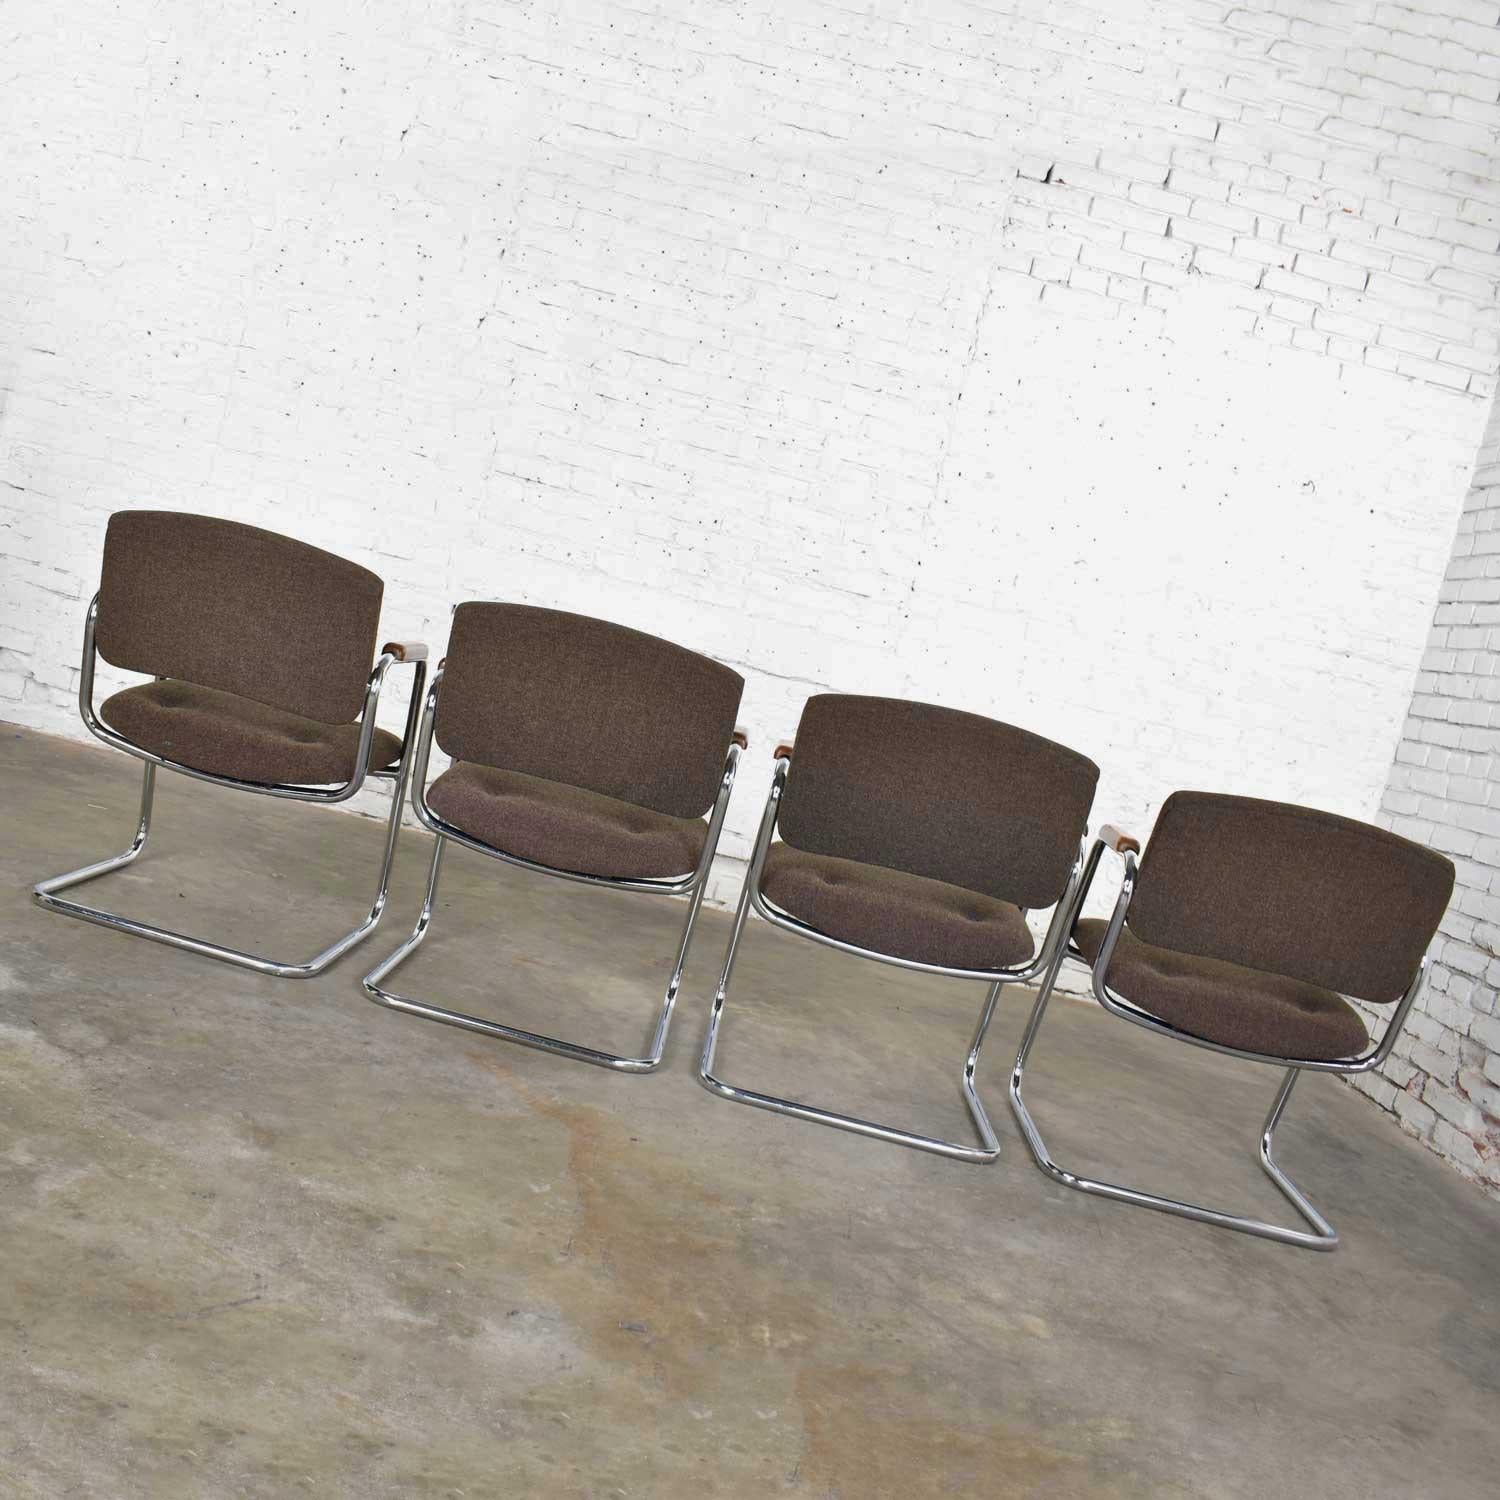 20th Century 4 Cantilever Armchairs Chrome Brown w/ Wood Arms Style of Steelcase or Pollock